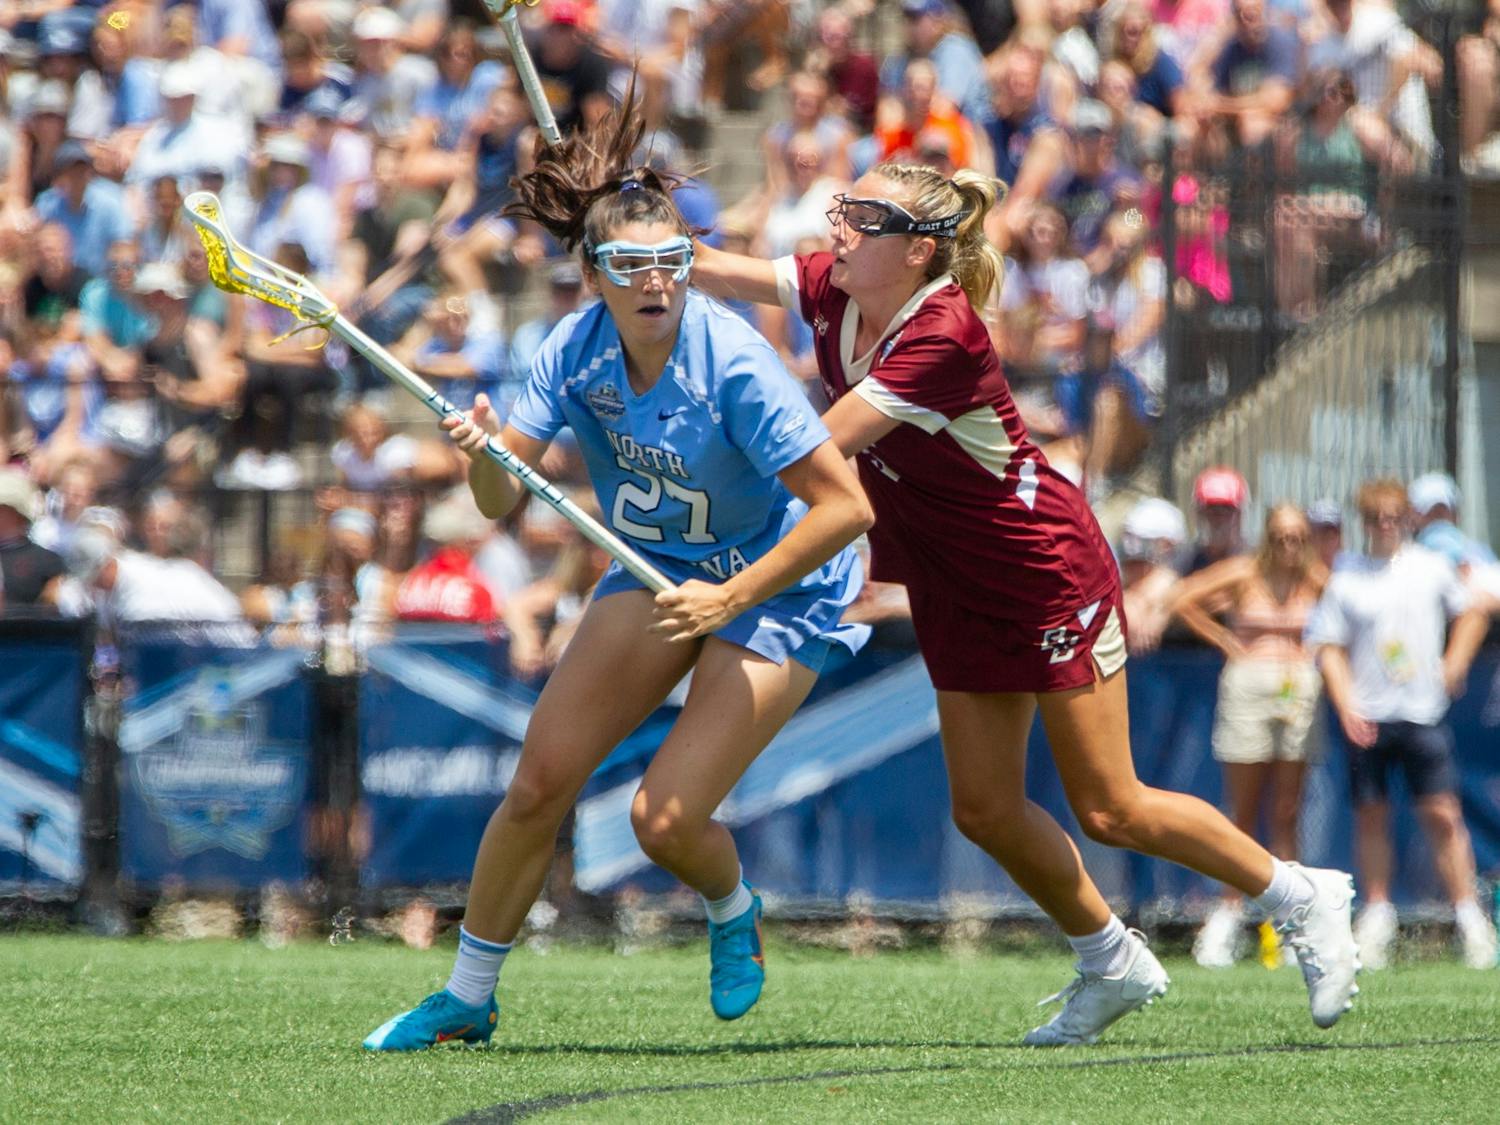 Junior midfielder Olivia Dirks (27) cradles the ball during UNC's NCAA Tournament Championship Final against Boston College at Homewood Field in Baltimore, Md. on Sunday, May 29, 2022. UNC won 12-11.